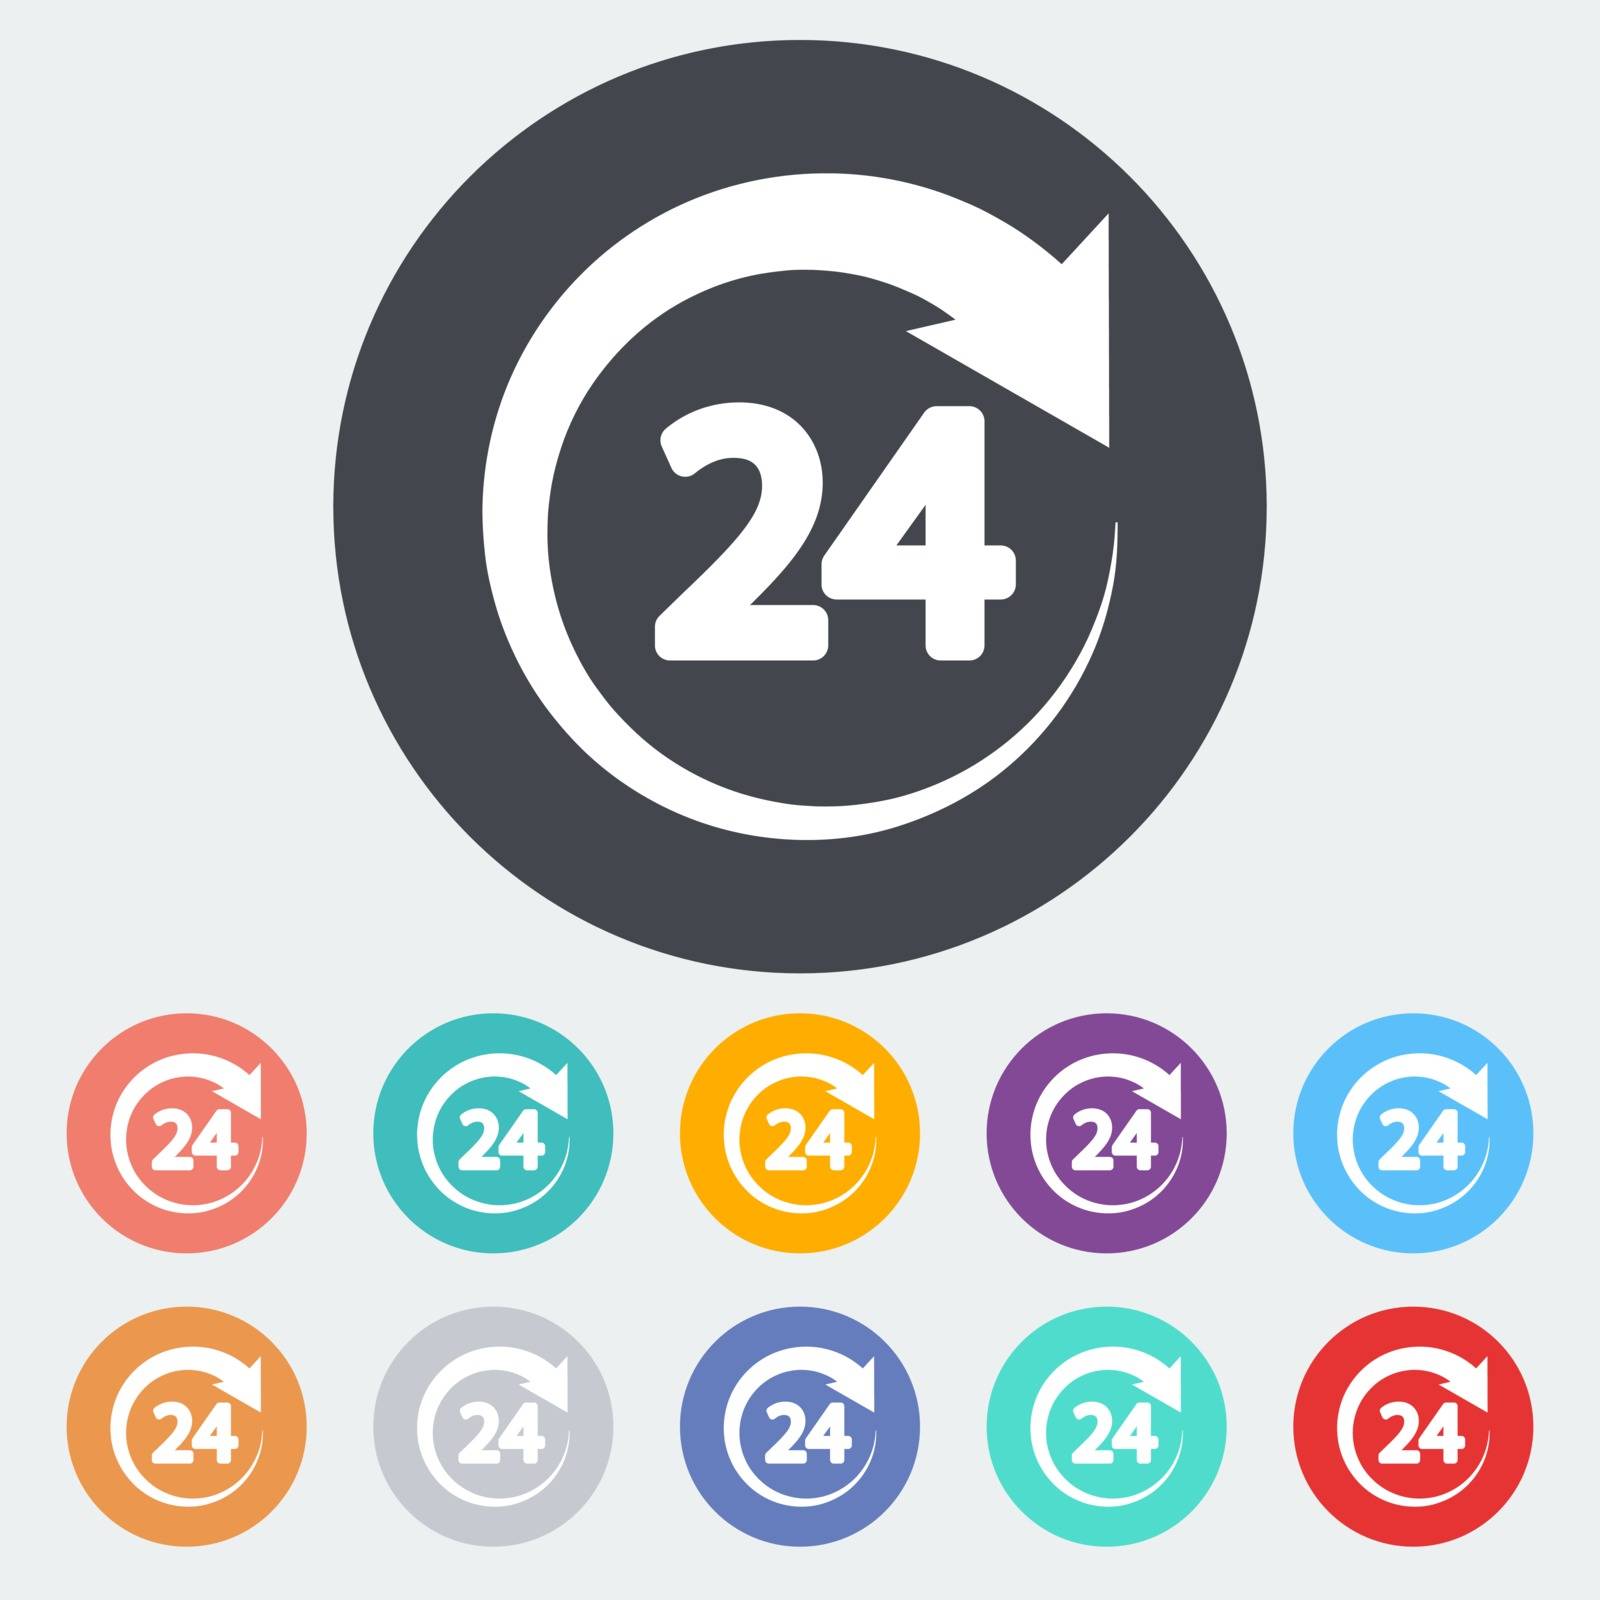 24 hours. Single flat icon on the circle. Vector illustration.